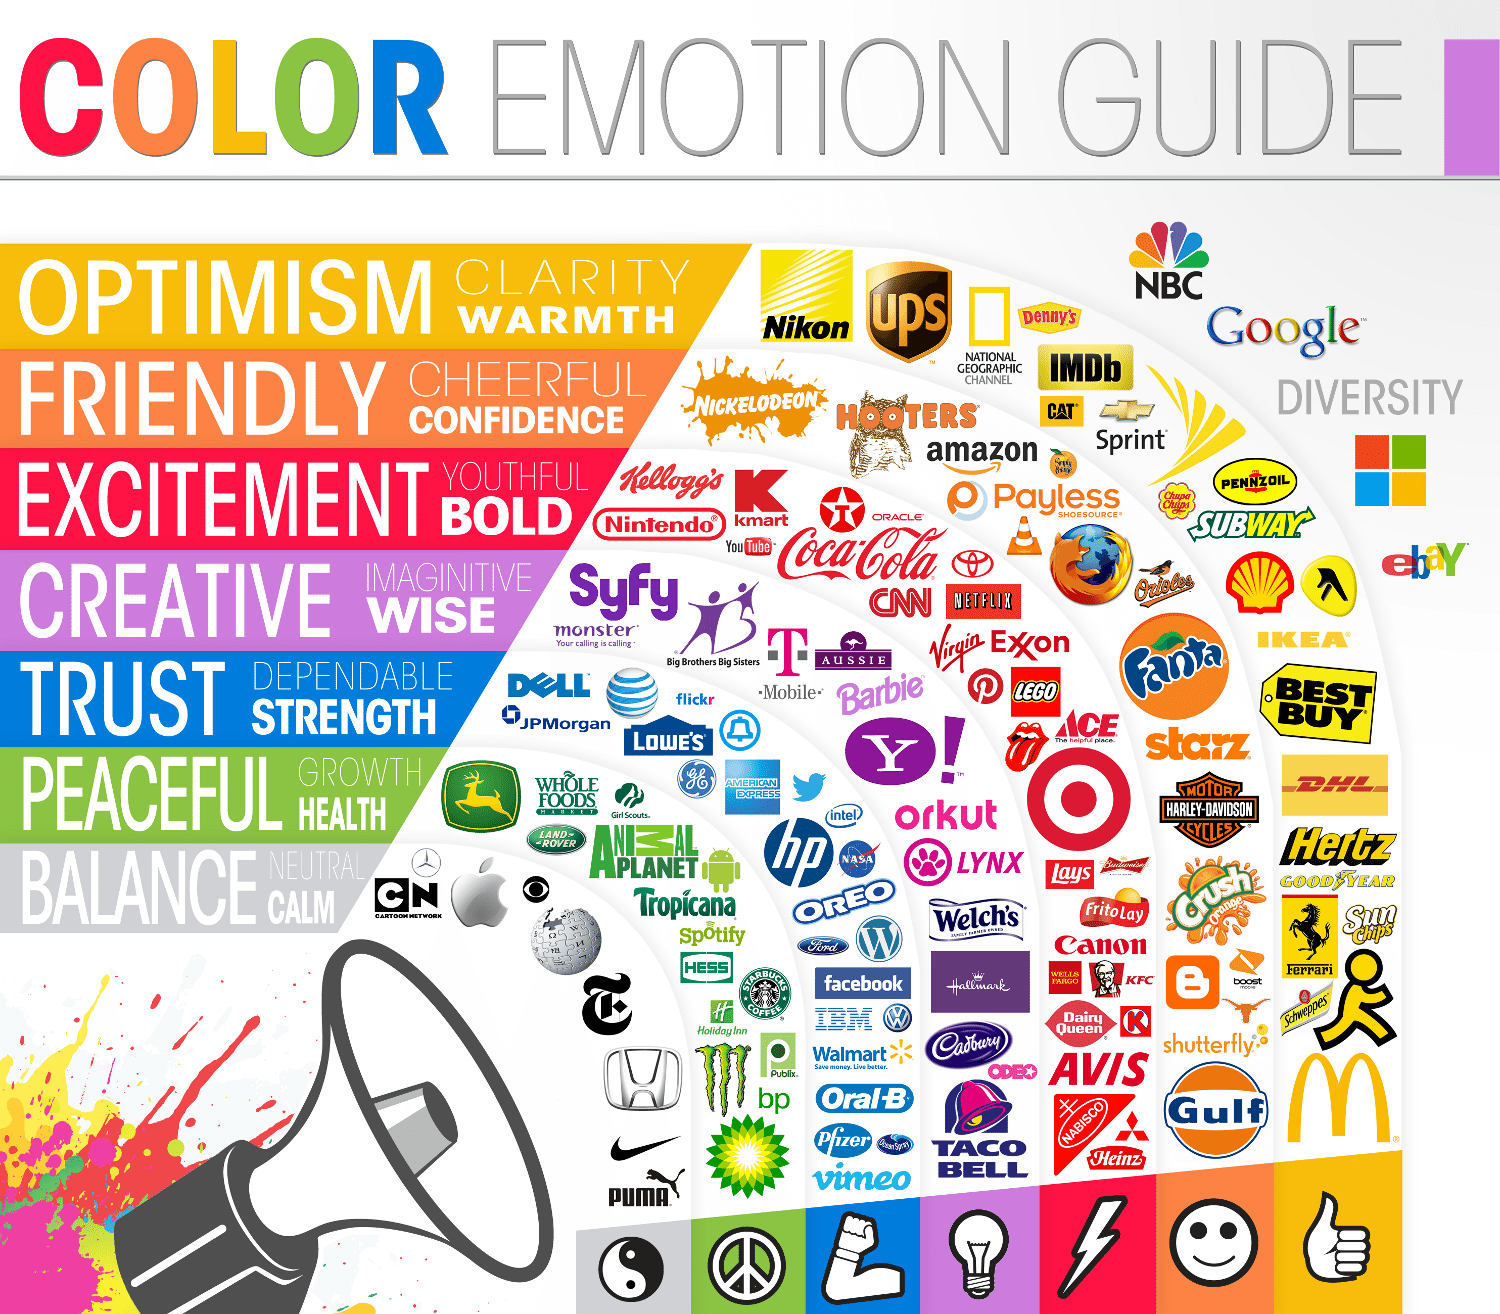 Color Orange Circle Logo - Why Facebook Is Blue: The Science of Colors in Marketing